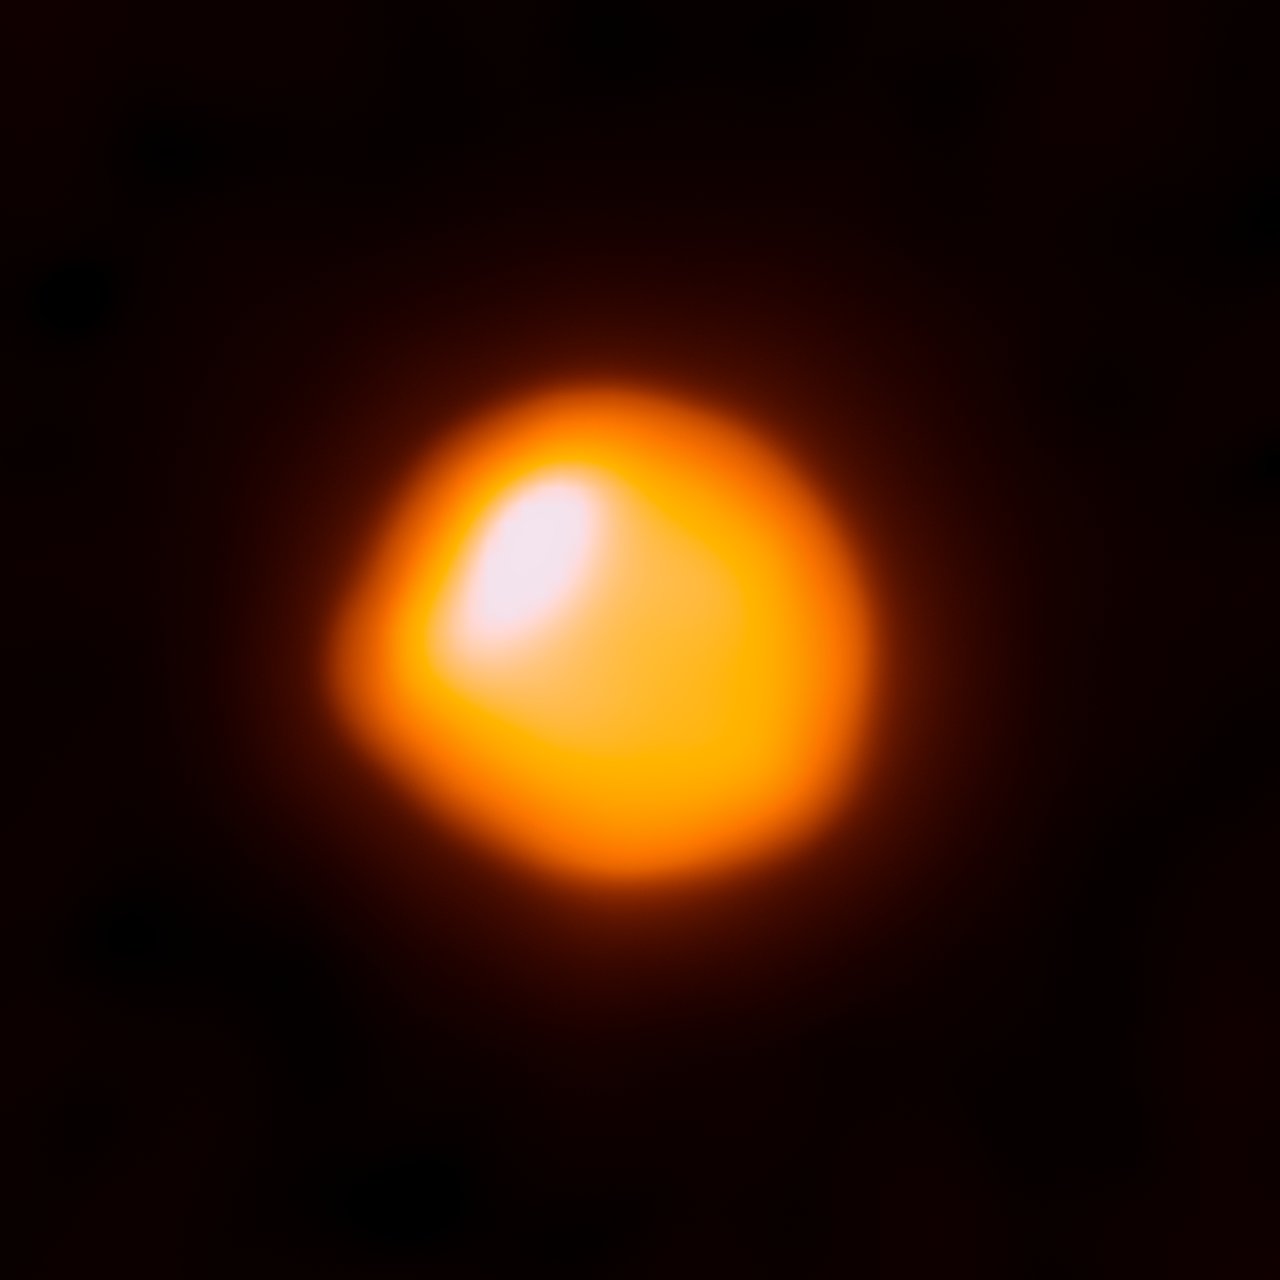 This orange blob shows the nearby star Betelgeuse, as seen by the Atacama Large Millimeter/submillimeter Array (ALMA). This is the first time that ALMA has ever observed the surface of a star and this first attempt has resulted in the highest-resolution image of Betelgeuse available. Betelgeuse is one of the largest stars currently known — with a radius around 1400 times larger than the Sun’s in the millimeter continuum. About 600 light-years away in the constellation of Orion (The Hunter), the red supergiant burns brightly, causing it to have only a short life expectancy. The star is just about eight million years old, but is already on the verge of becoming a supernova. When that happens, the resulting explosion will be visible from Earth, even in broad daylight. The star has been observed in many other wavelengths, particularly in the visible, infrared, and ultraviolet. Using ESO’s Very Large Telescope astronomers discovered a vast plume of gas almost as large as our Solar System. Astronomers have also found a gigantic bubble that boils away on Betelgeuse’s surface. These features help to explain how the star is shedding gas and dust at tremendous rates (eso0927, eso1121). In this picture, ALMA observes the hot gas of the photosphere of Betelgeuse at sub-millimeter wavelengths — where localised increased temperatures explain why it is not symmetric. Scientifically, ALMA can help us to understand the extended atmospheres of these hot, blazing stars. Links:  Size comparison: Betelgeuse and the Sun